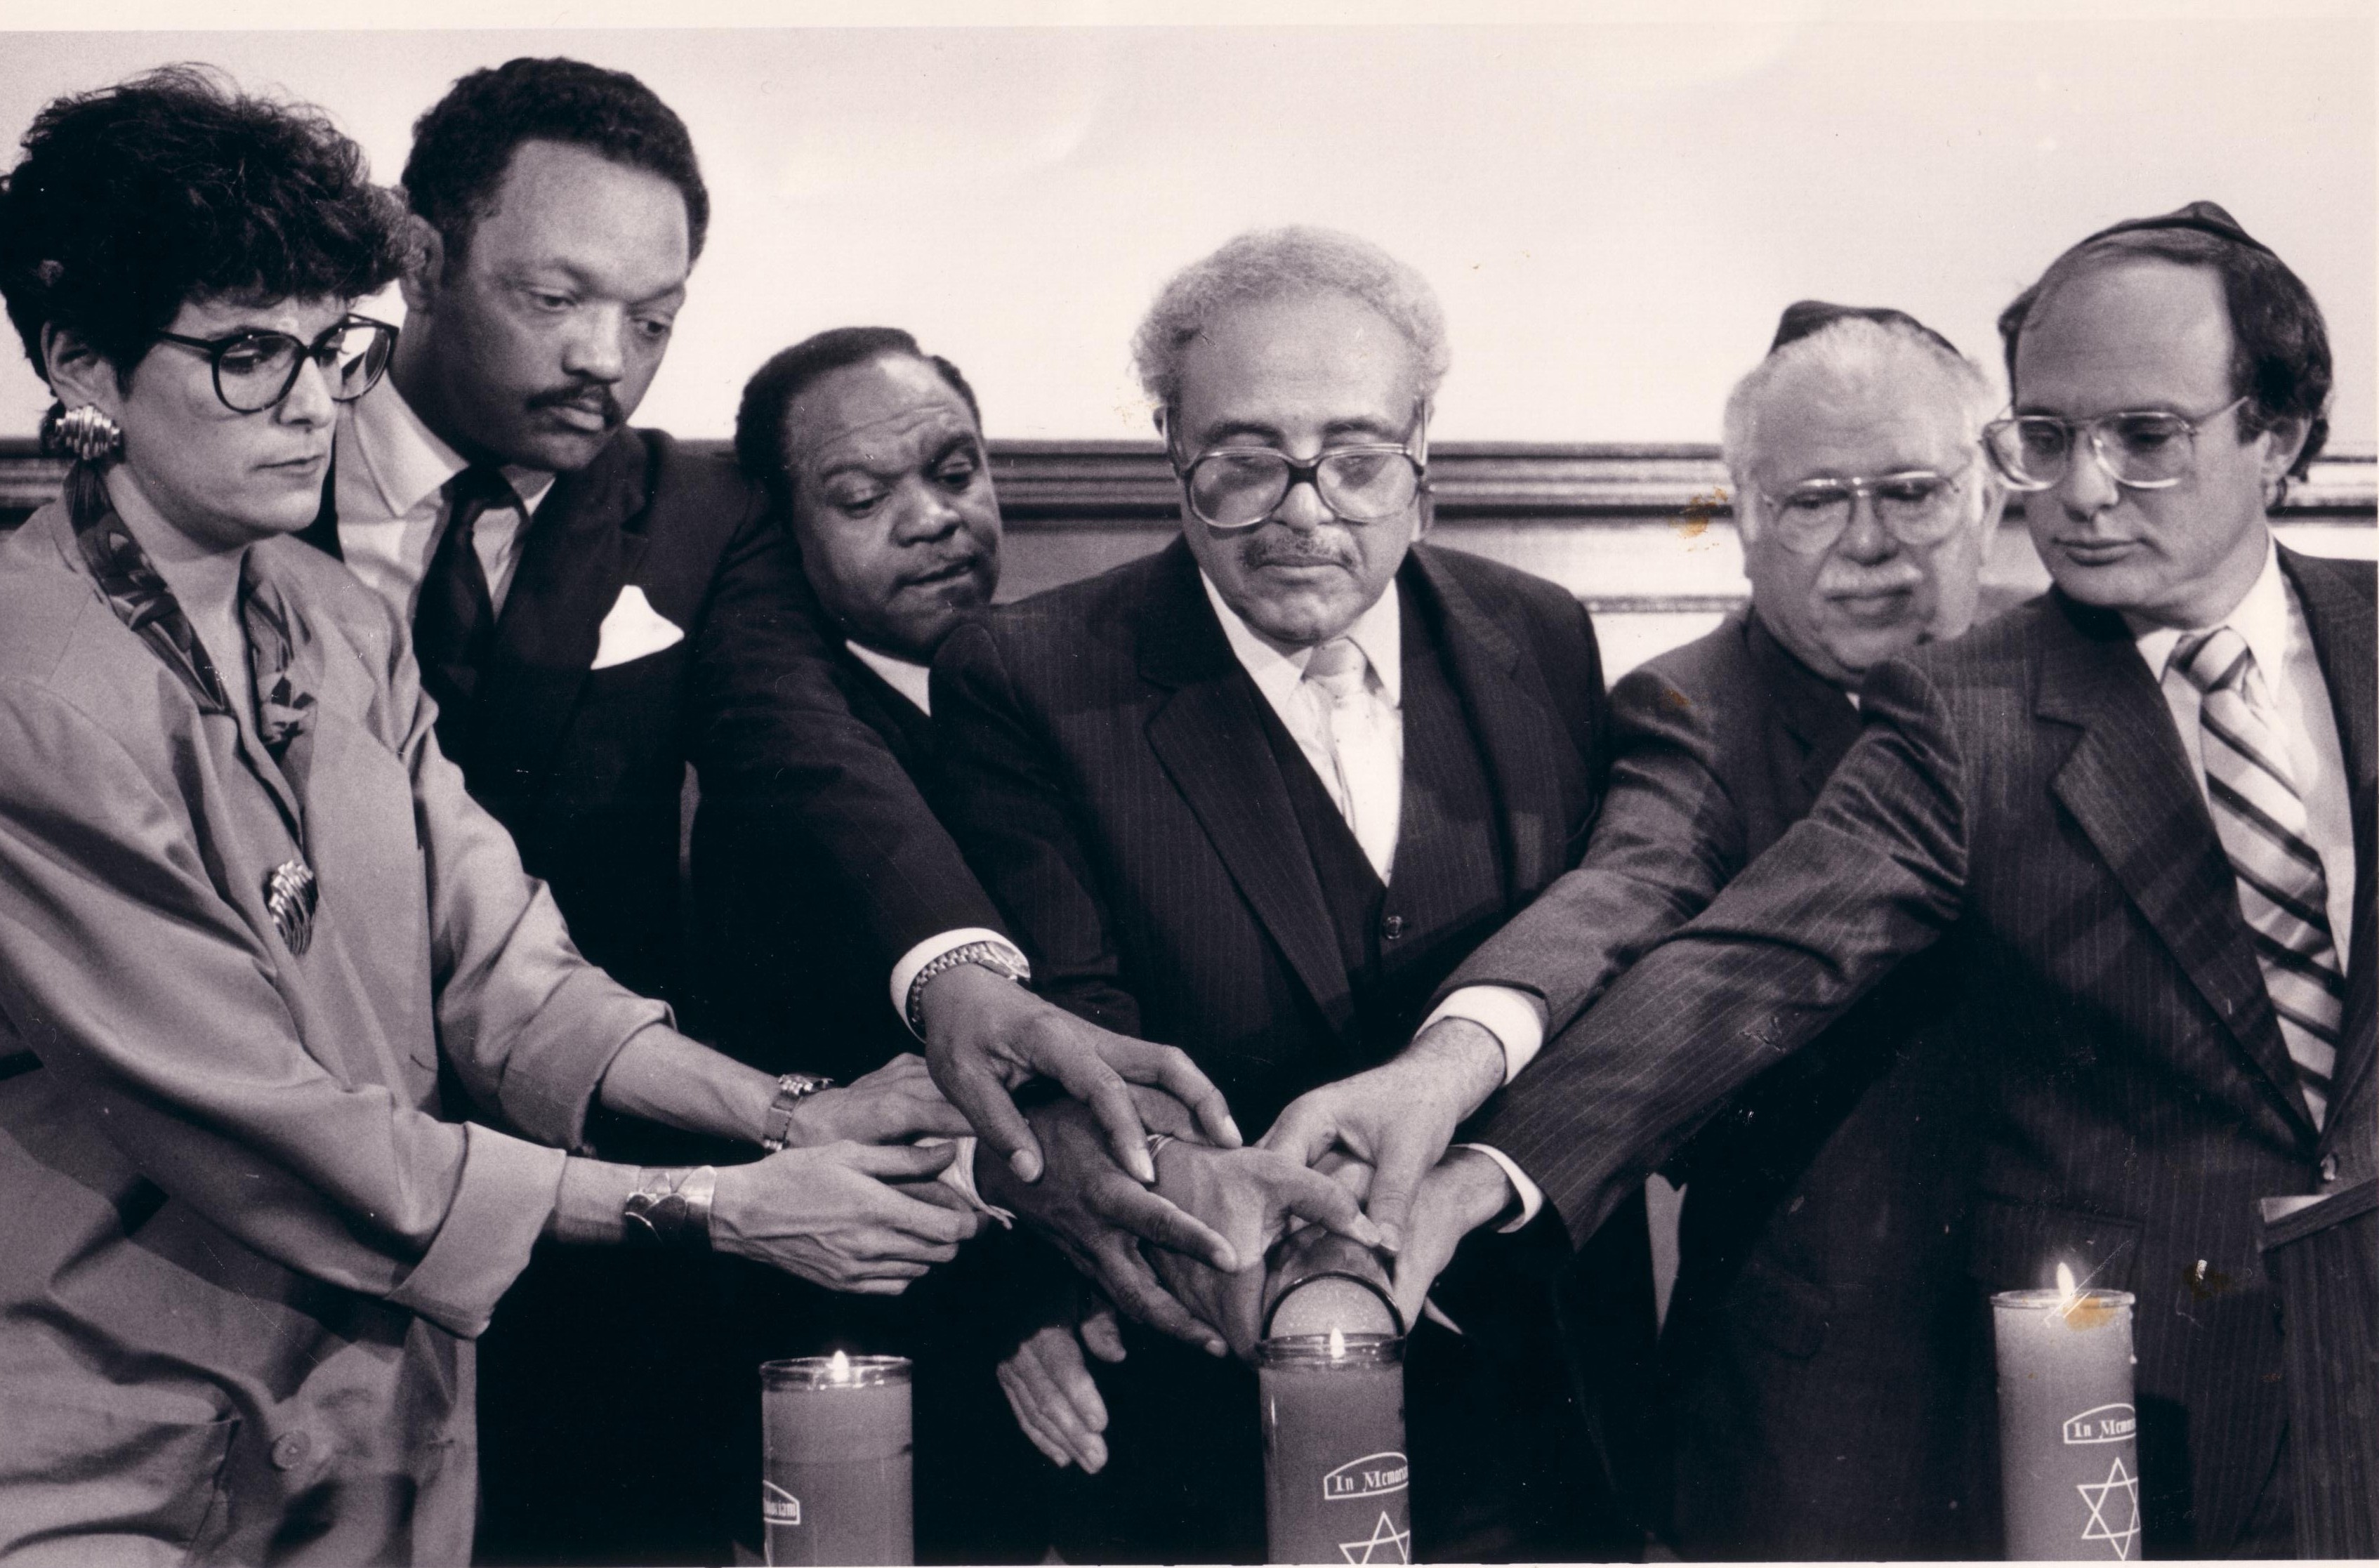 Civil rights leaders together